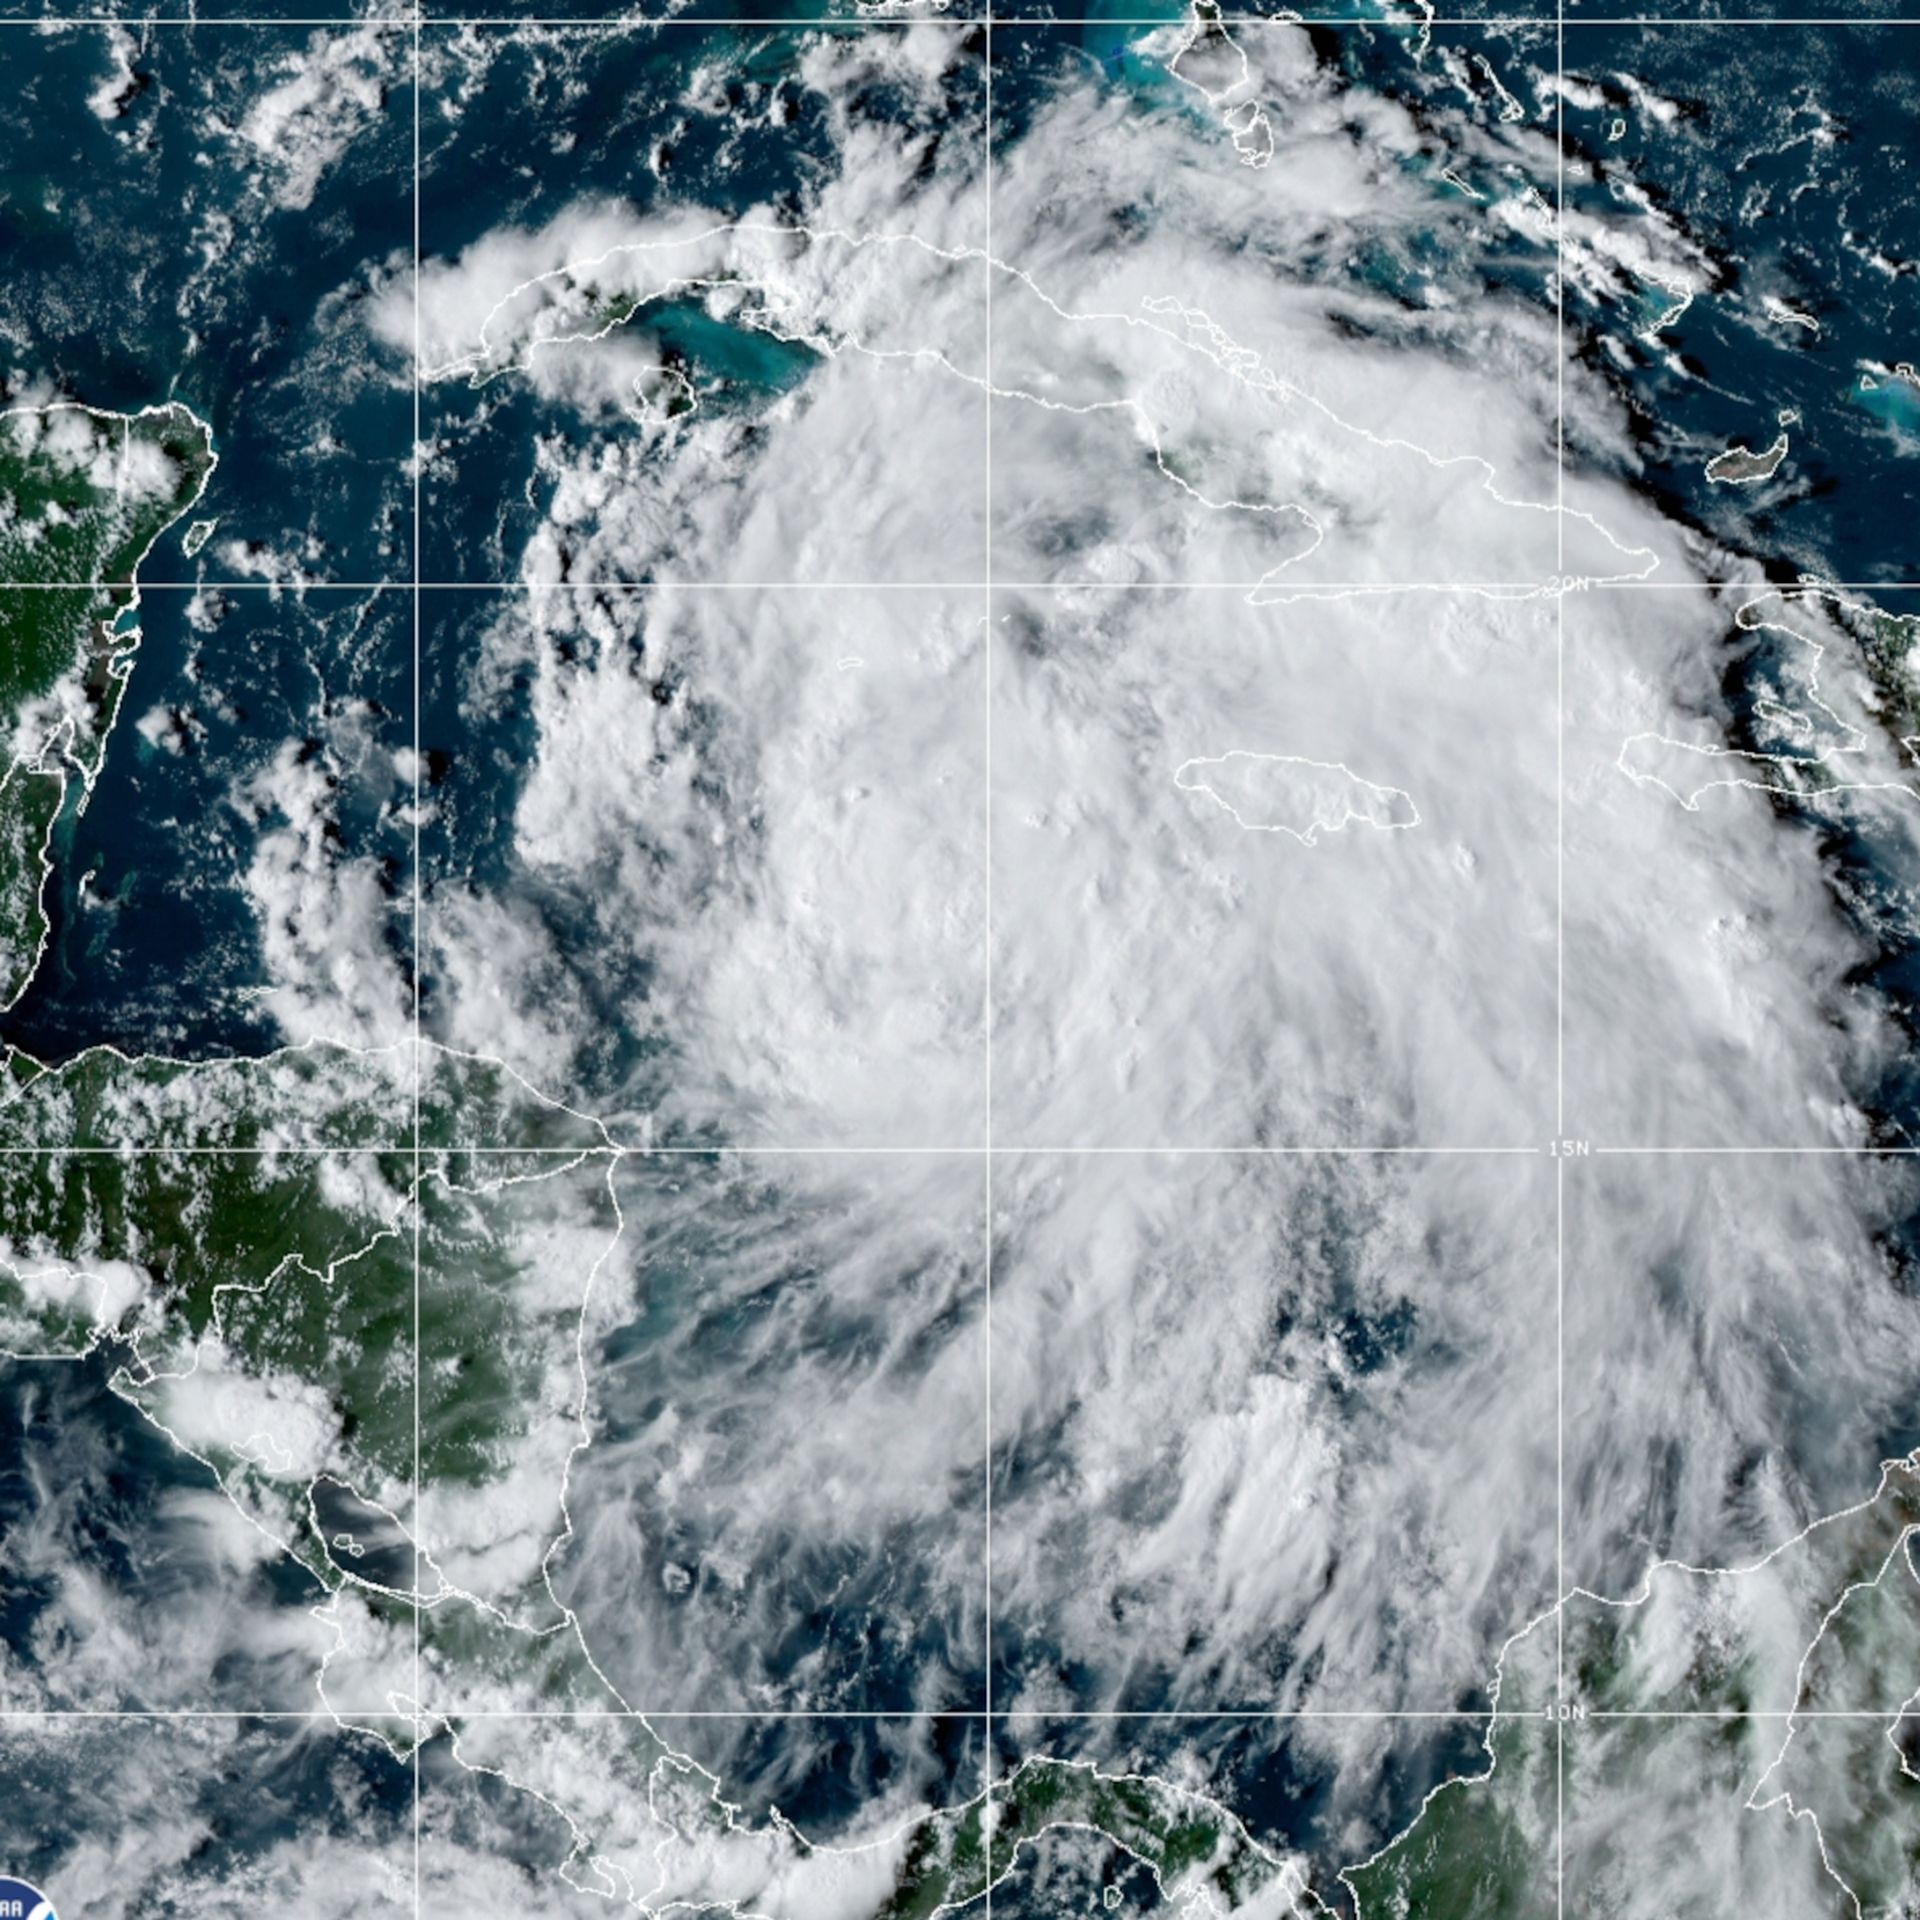 Tropical Storm Ian as captured by a NOAA satellite on September 25, 2022.